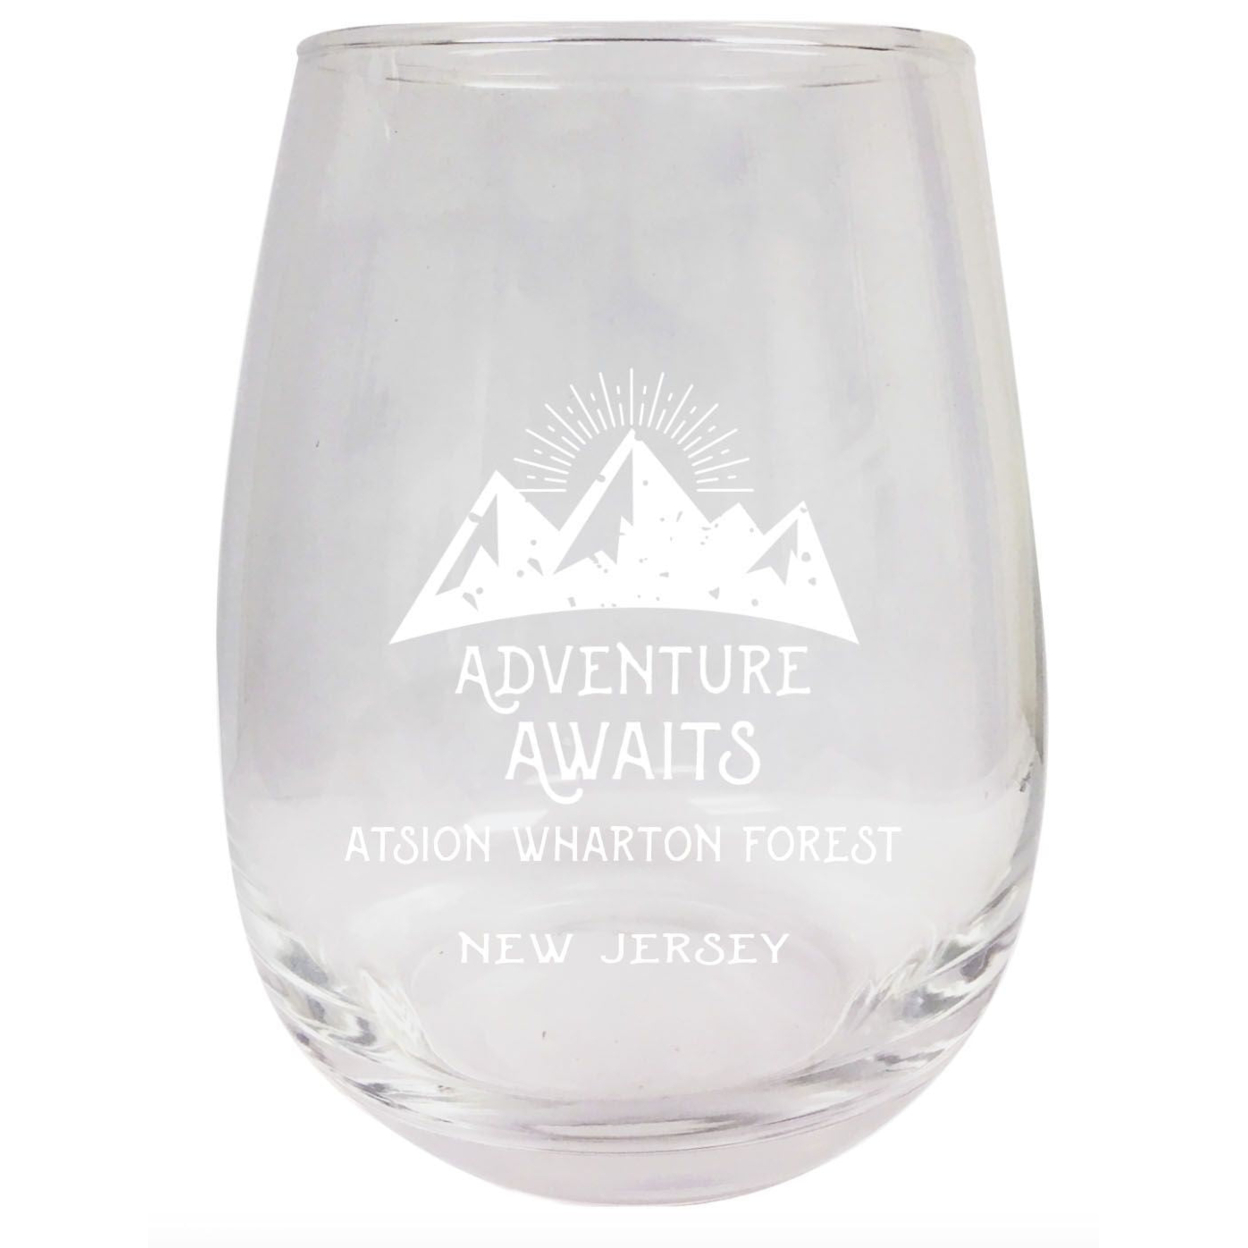 New Jersey Engraved Stemless Wine Glass Duo